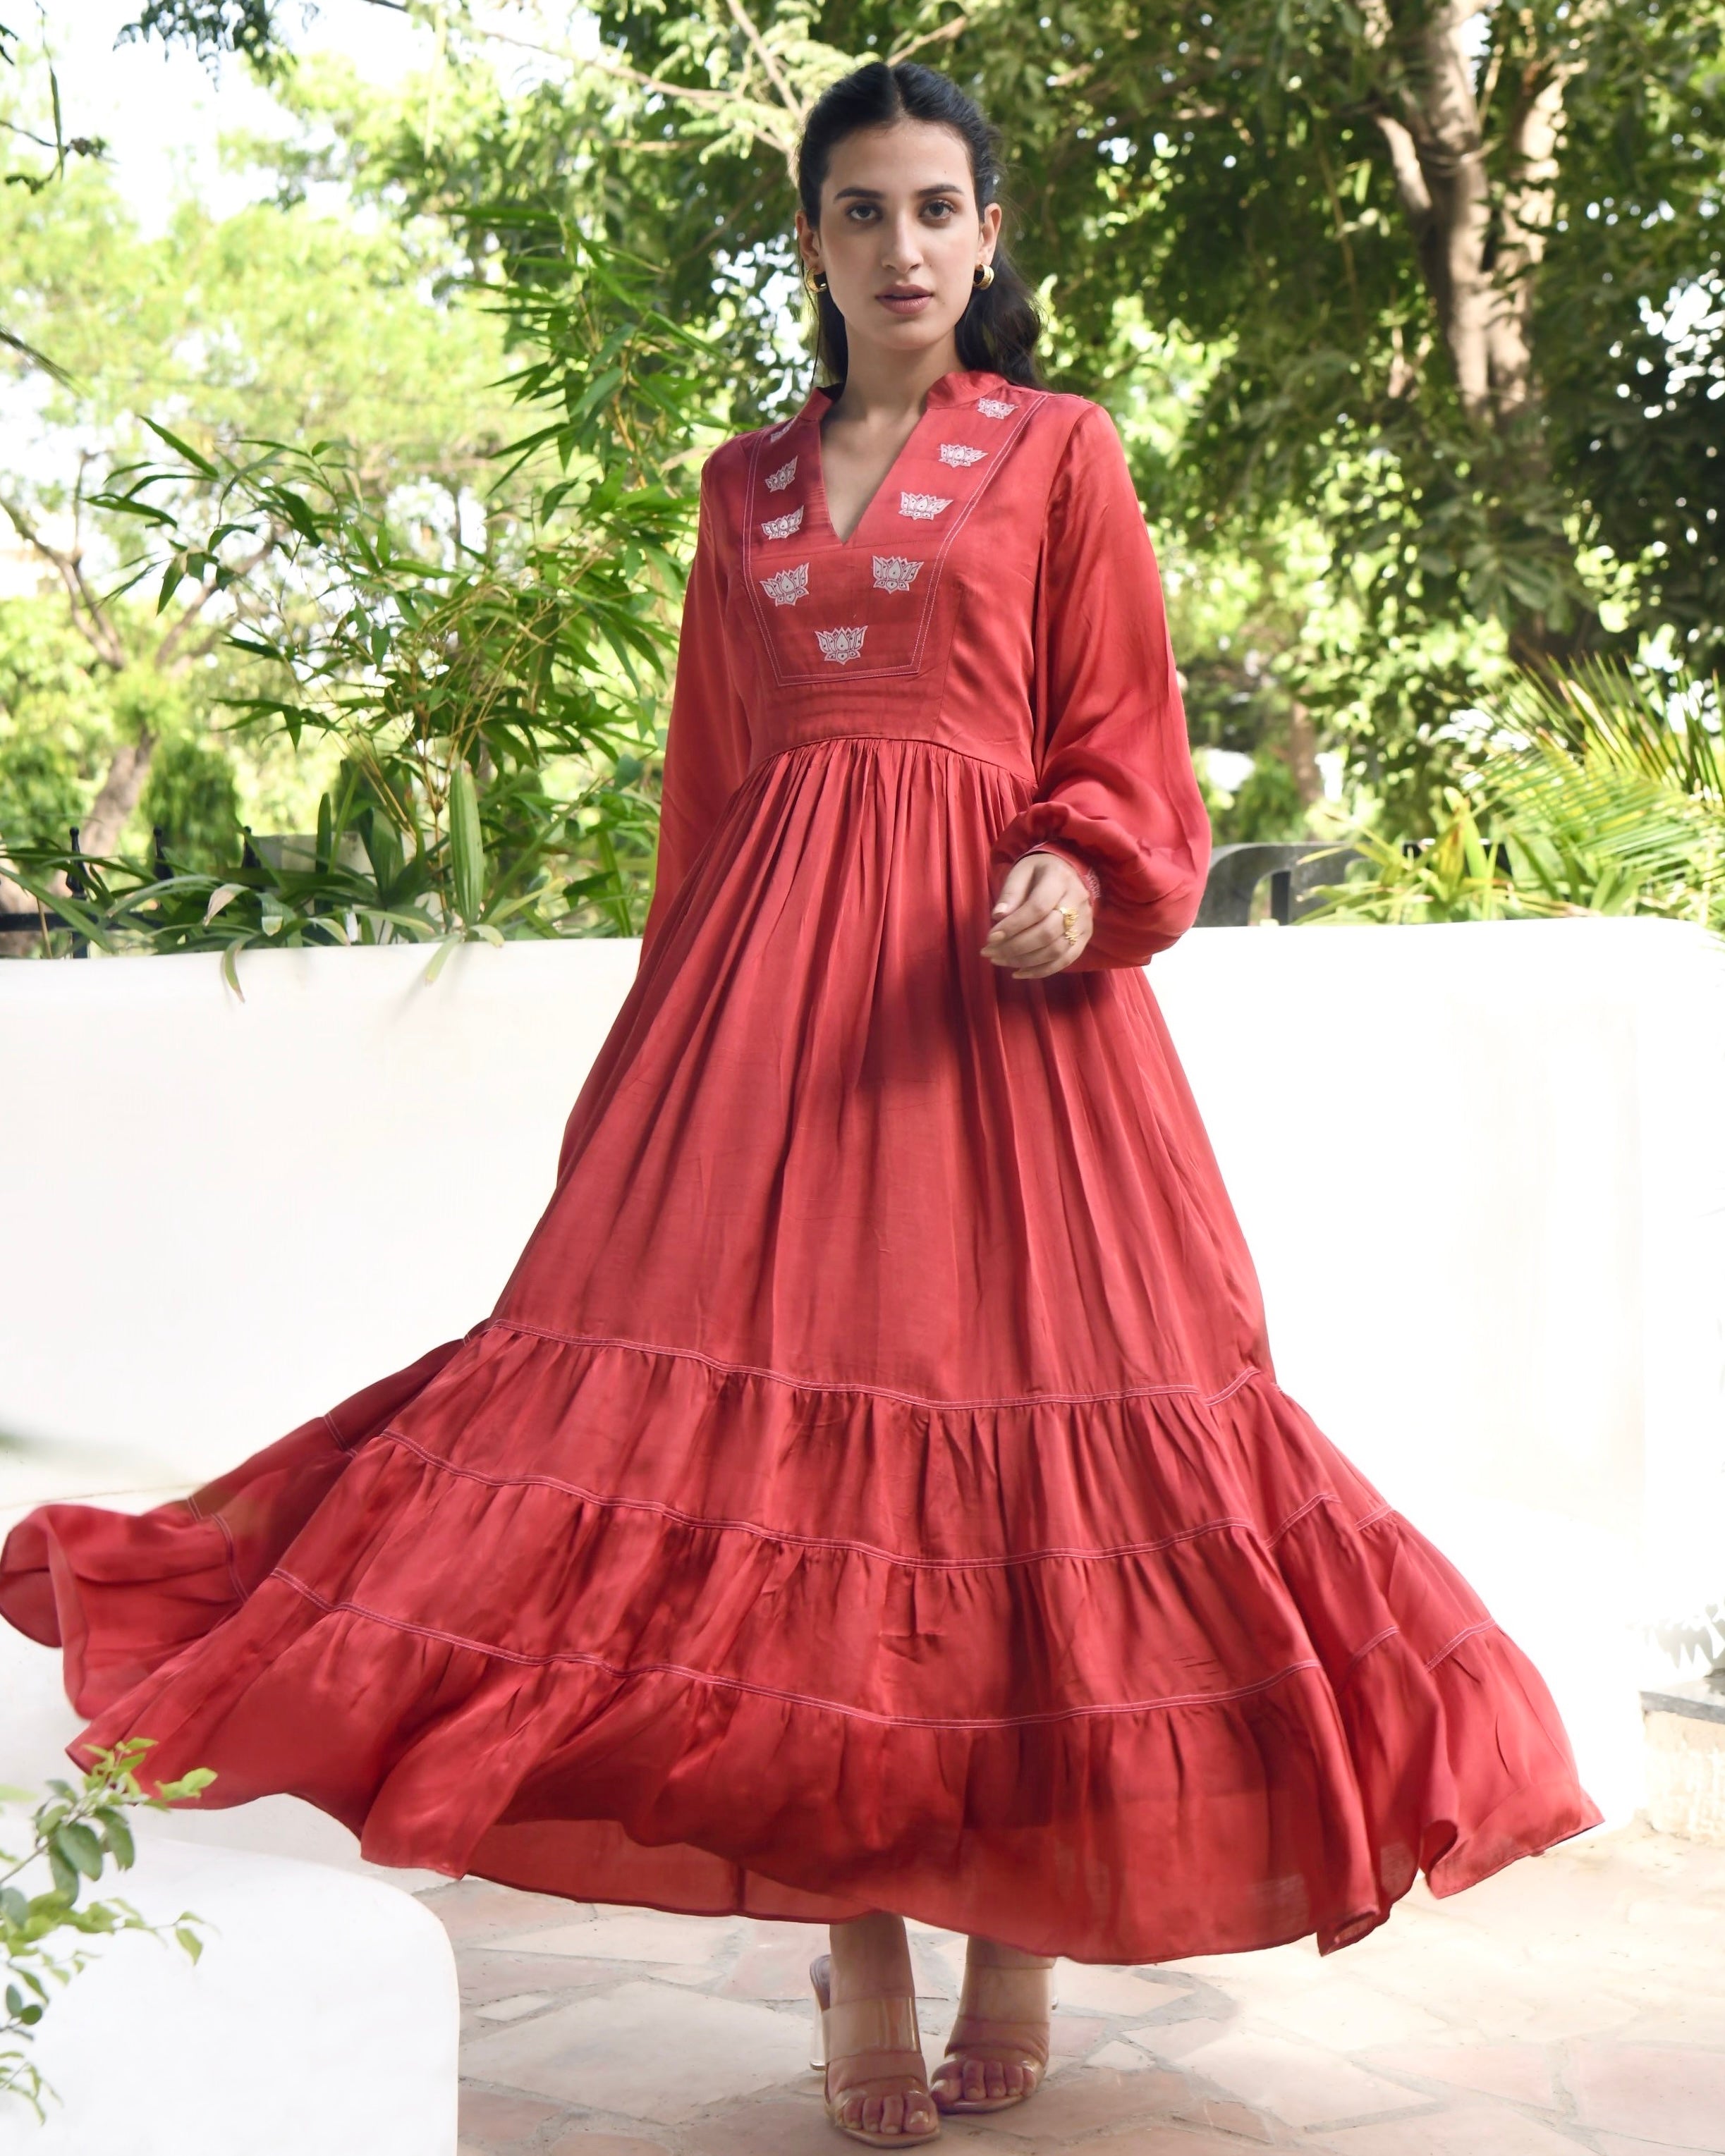 Very Beautiful Newly Wed Bride Red Colour Suit| Red Dress/Gown/Anarkali/ Frock/Sharara/Gharara Design | Different color dress, Gowns dresses, Formal  dresses long